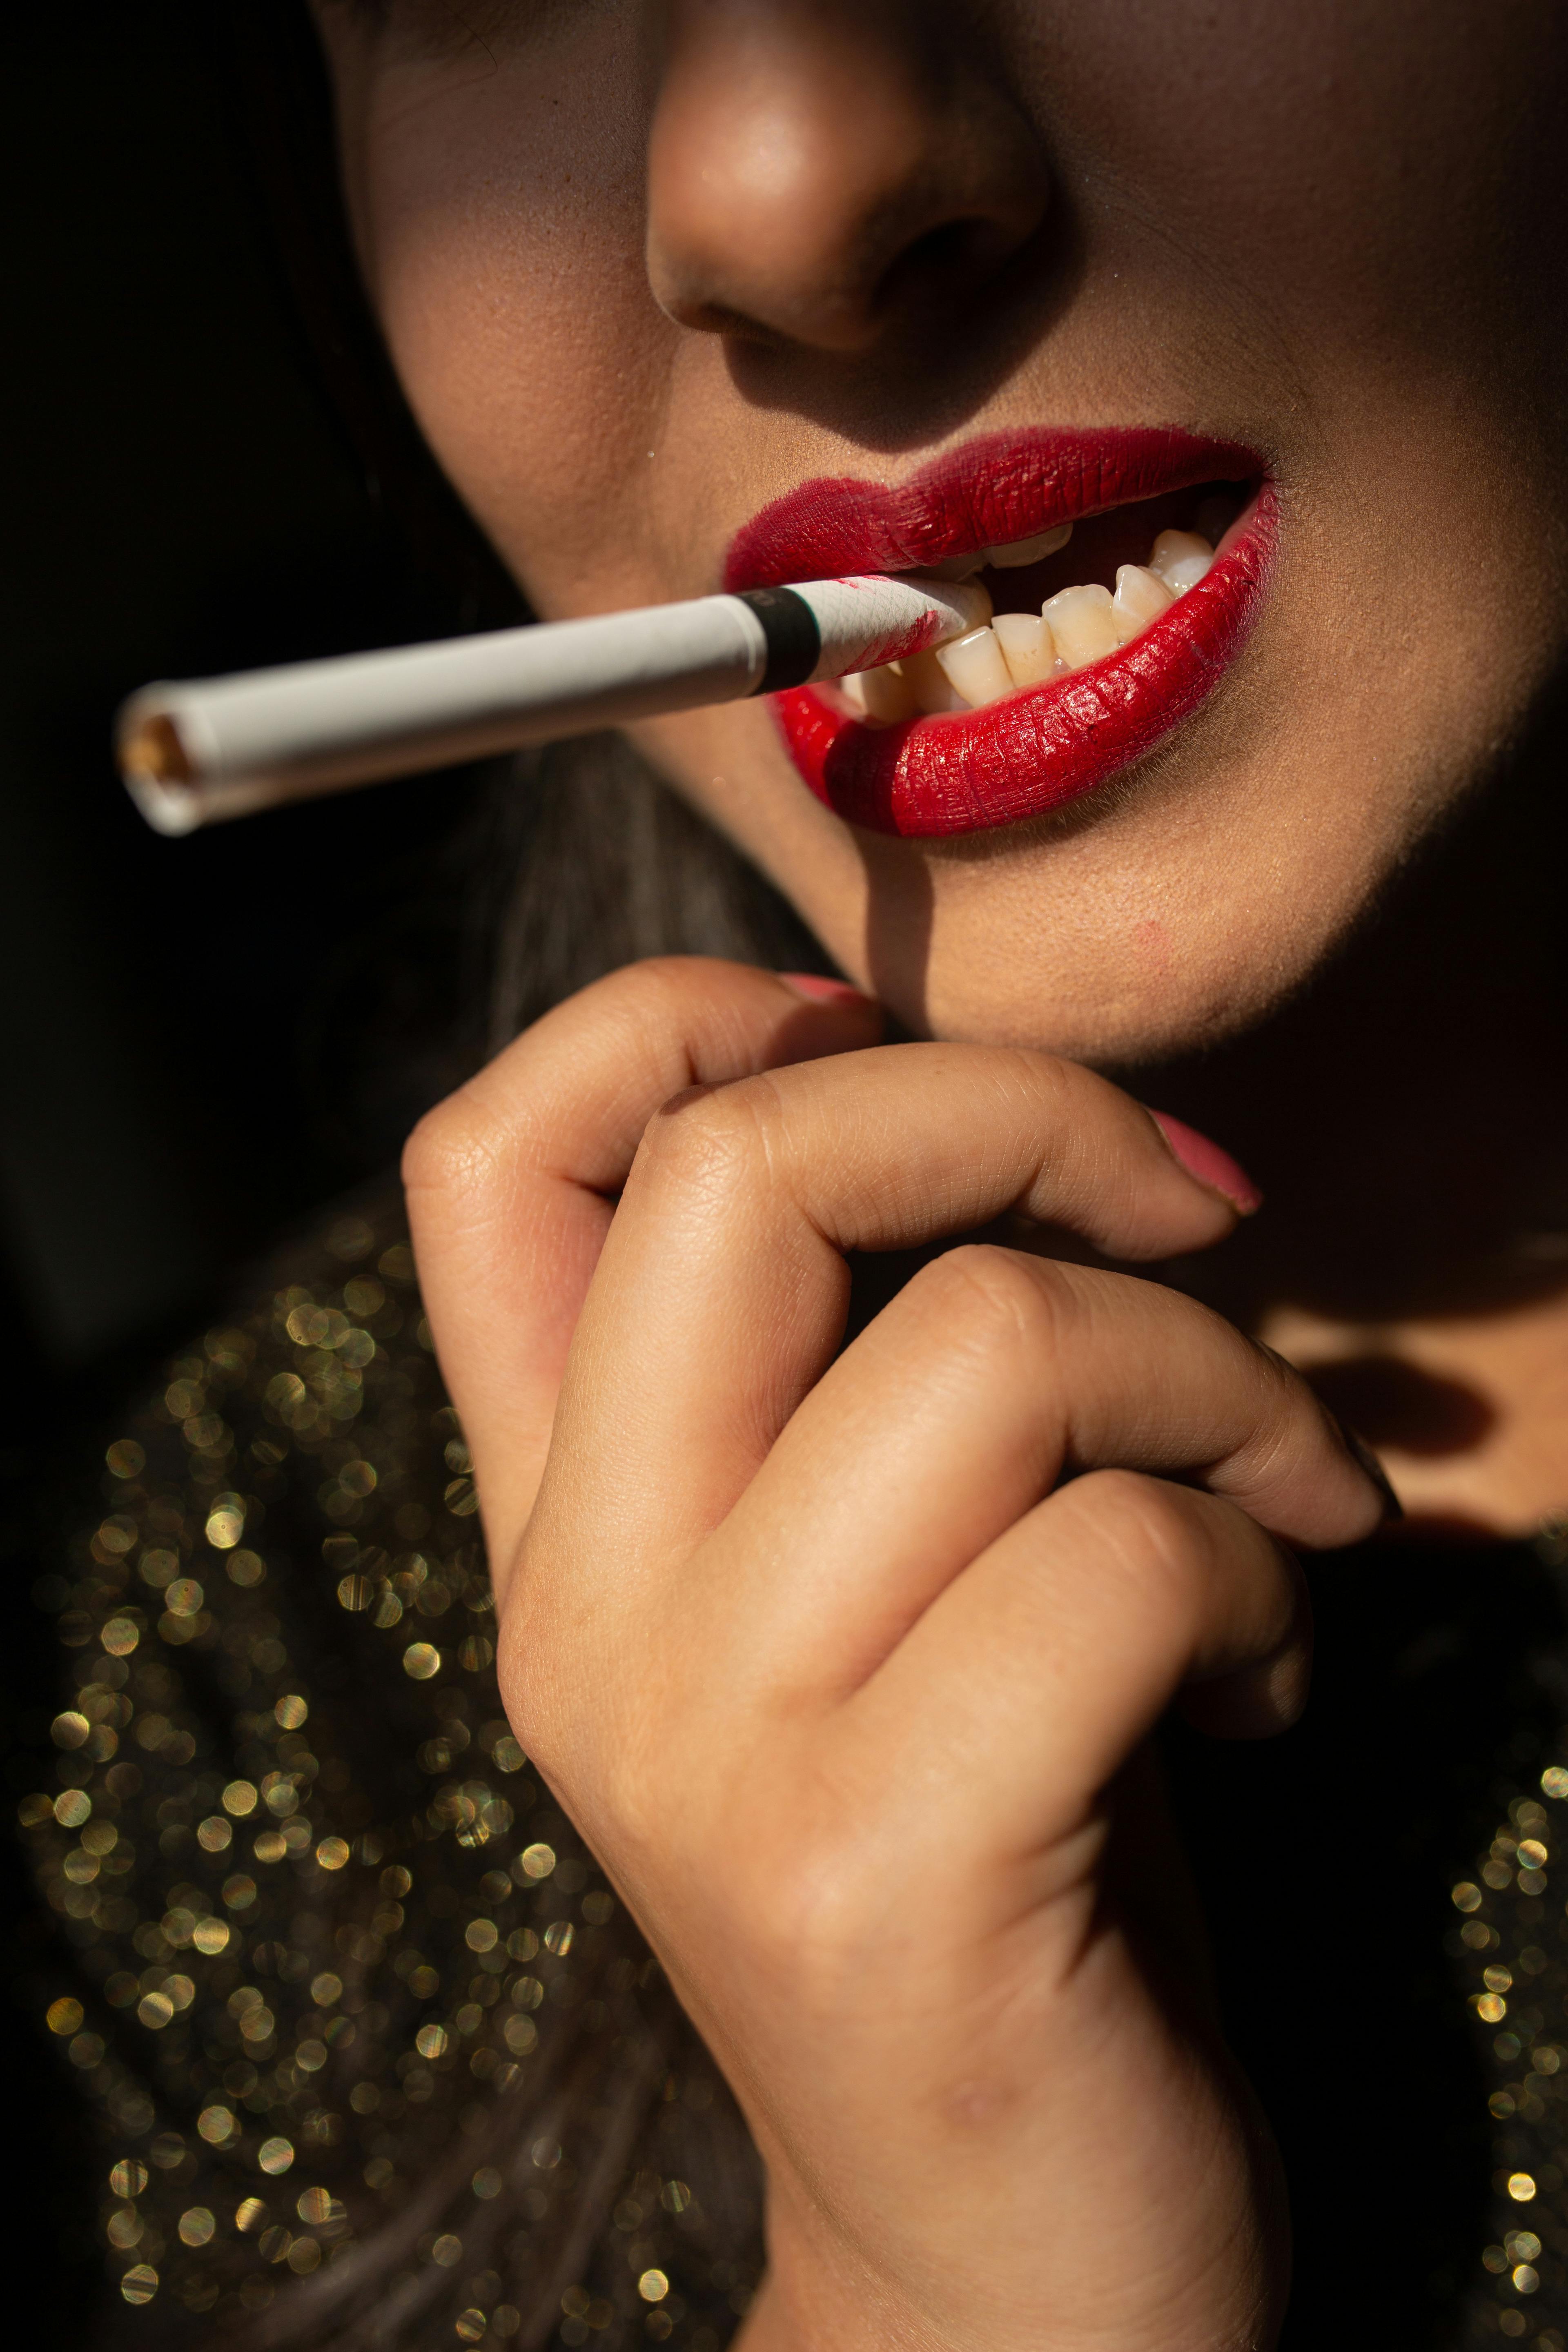 Lege med Bowling Stedord A Woman with Red Lips Smoking a Cigarette · Free Stock Photo